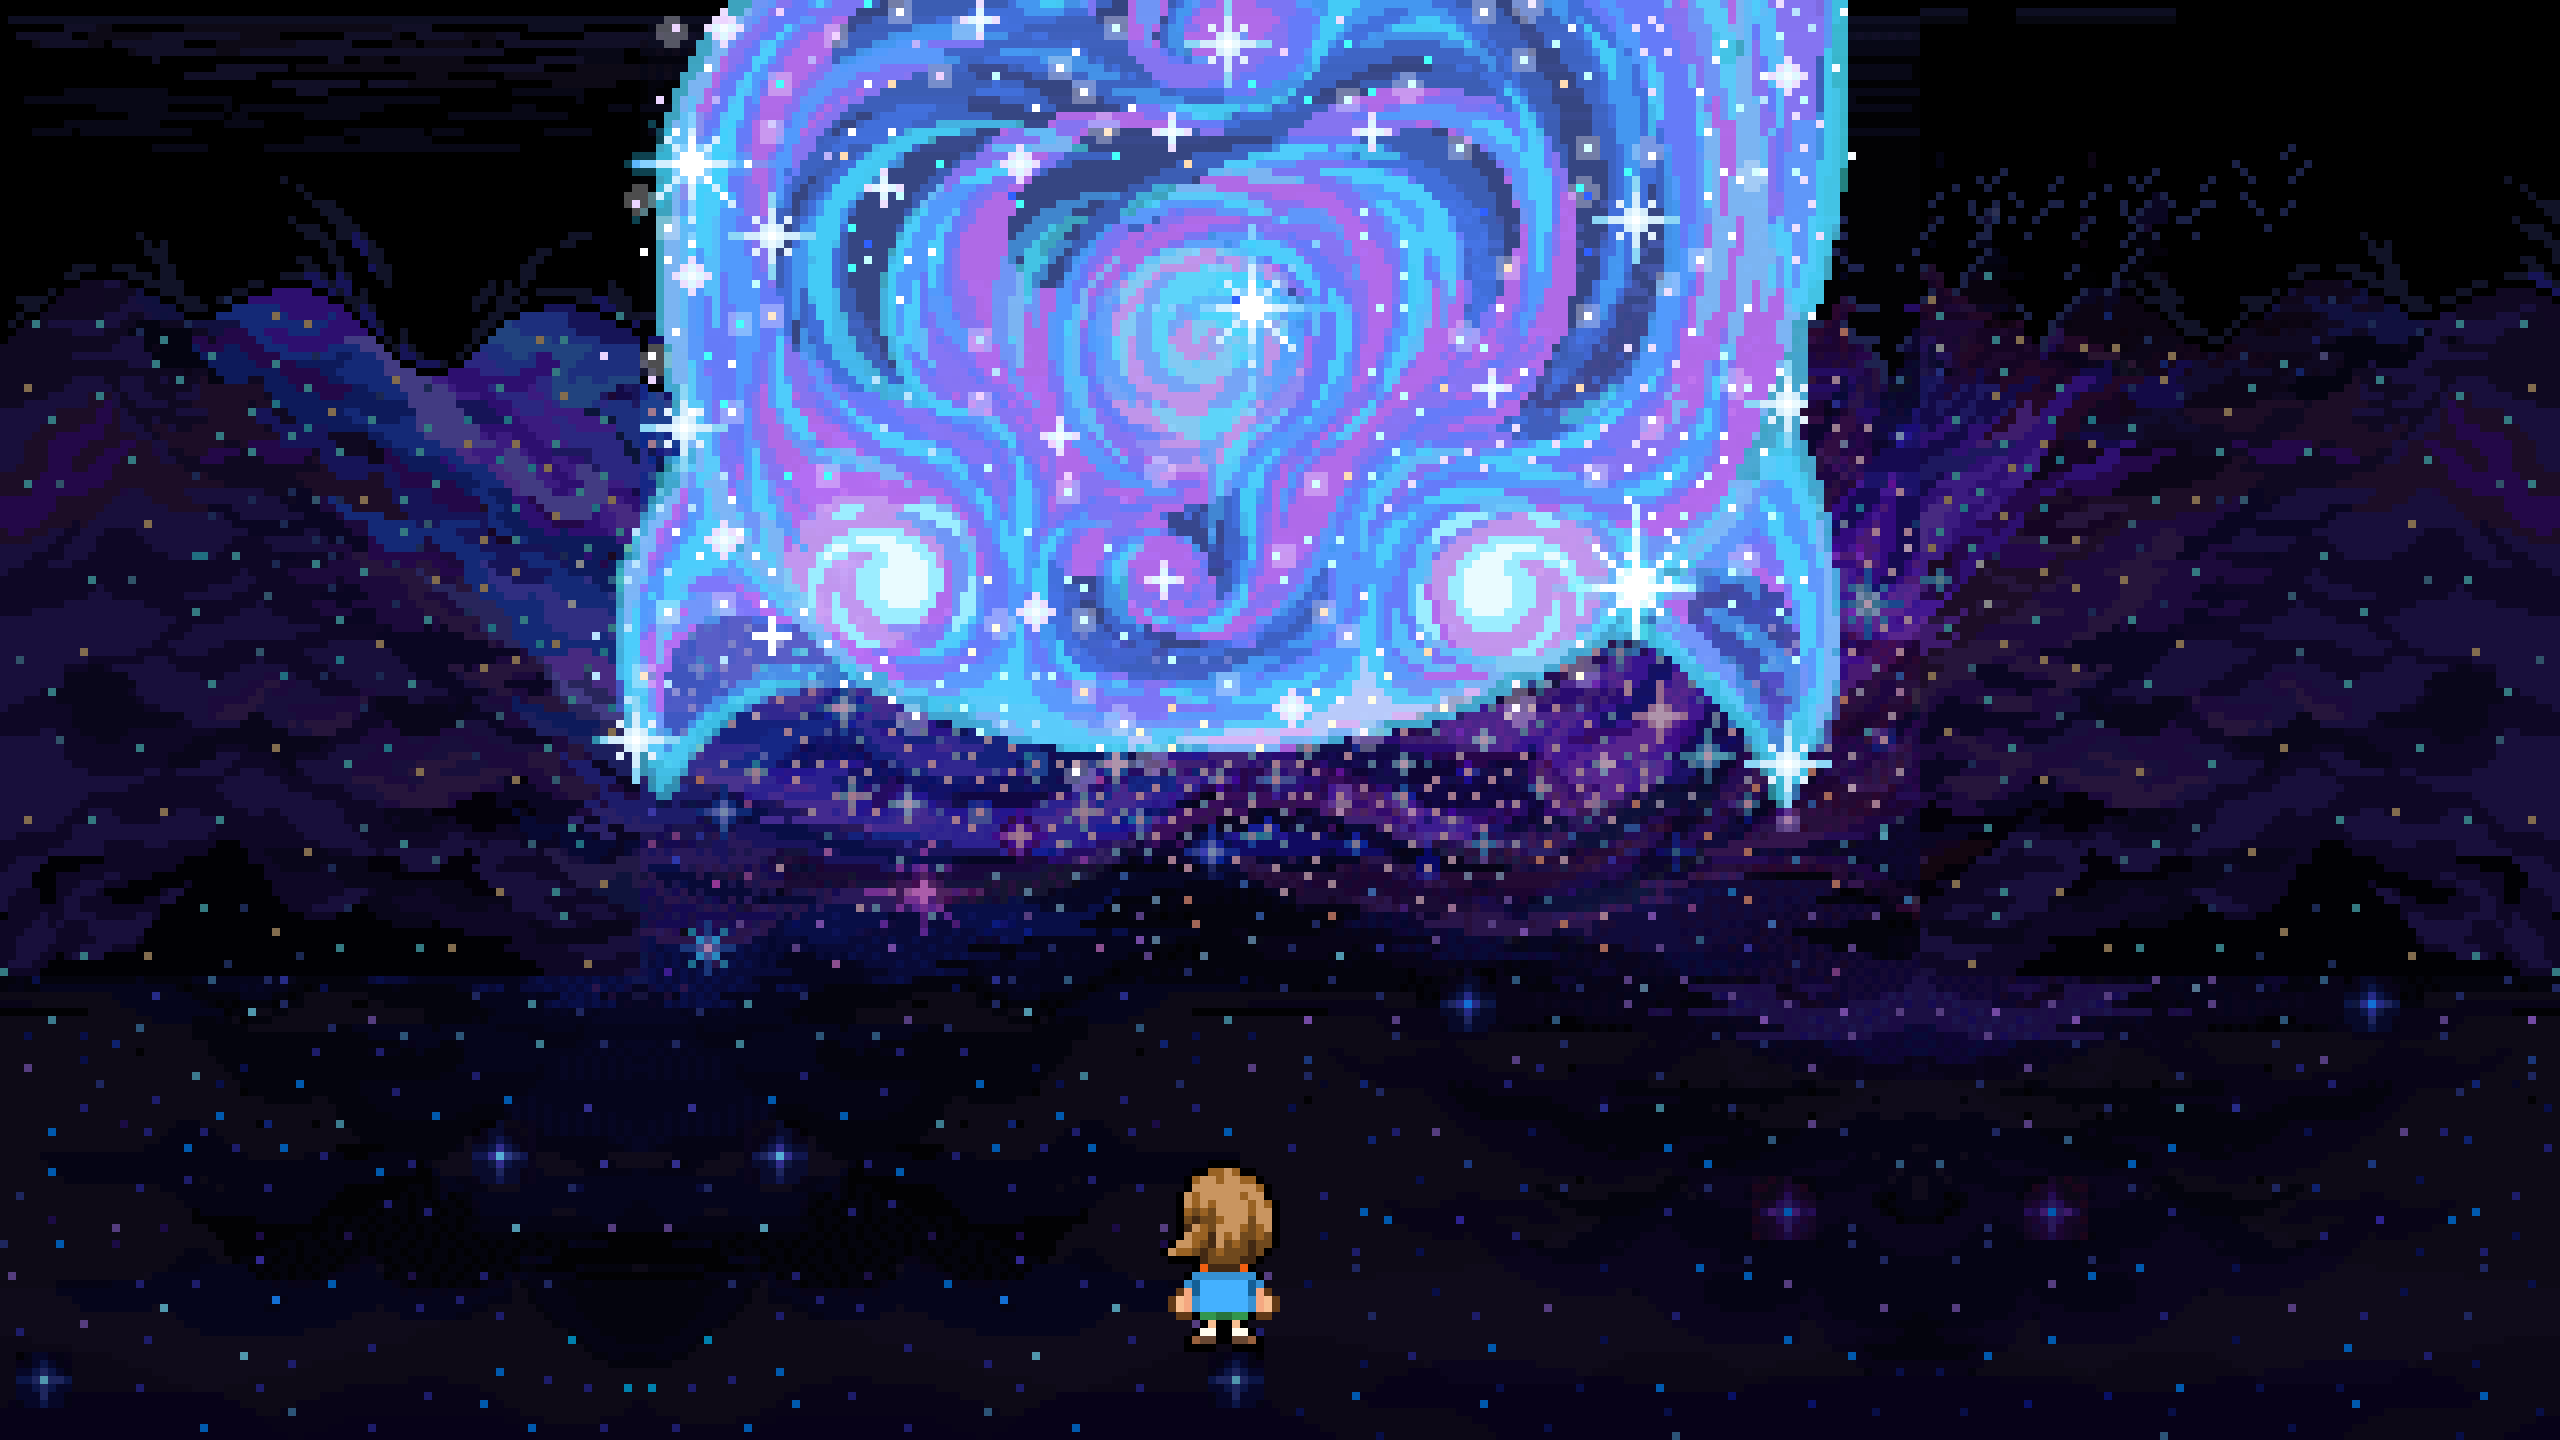 A screenshot from Fishing Paradiso. A boy is stnading in front of God Fish in the Milky Way.